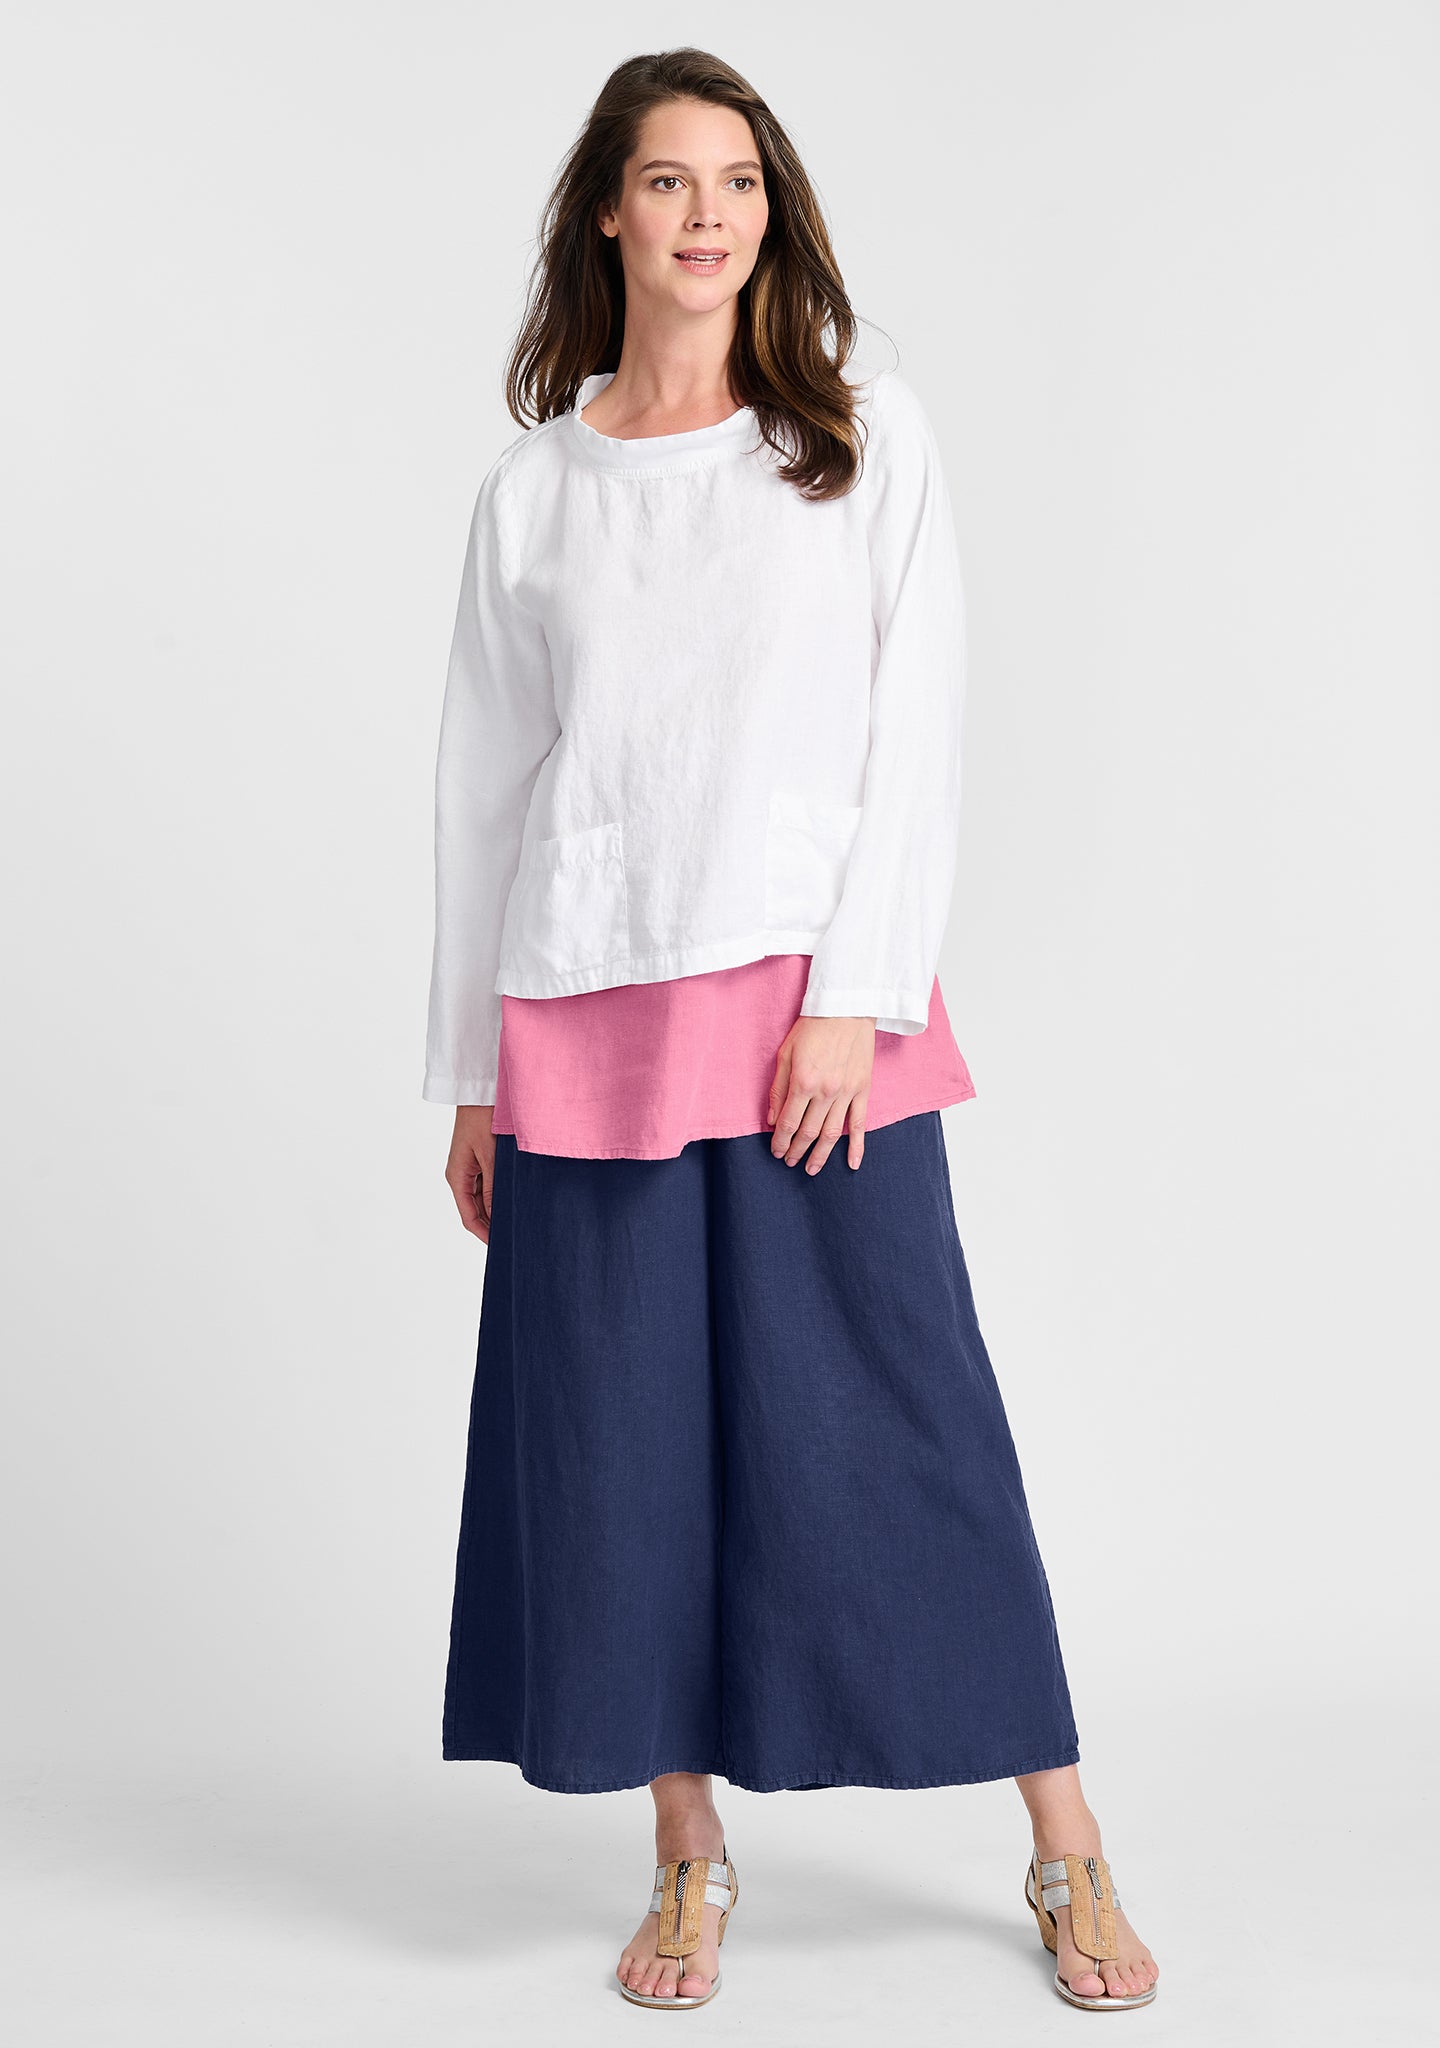 FLAX linen shirt in white with linen tank in pink and linen pants in blue